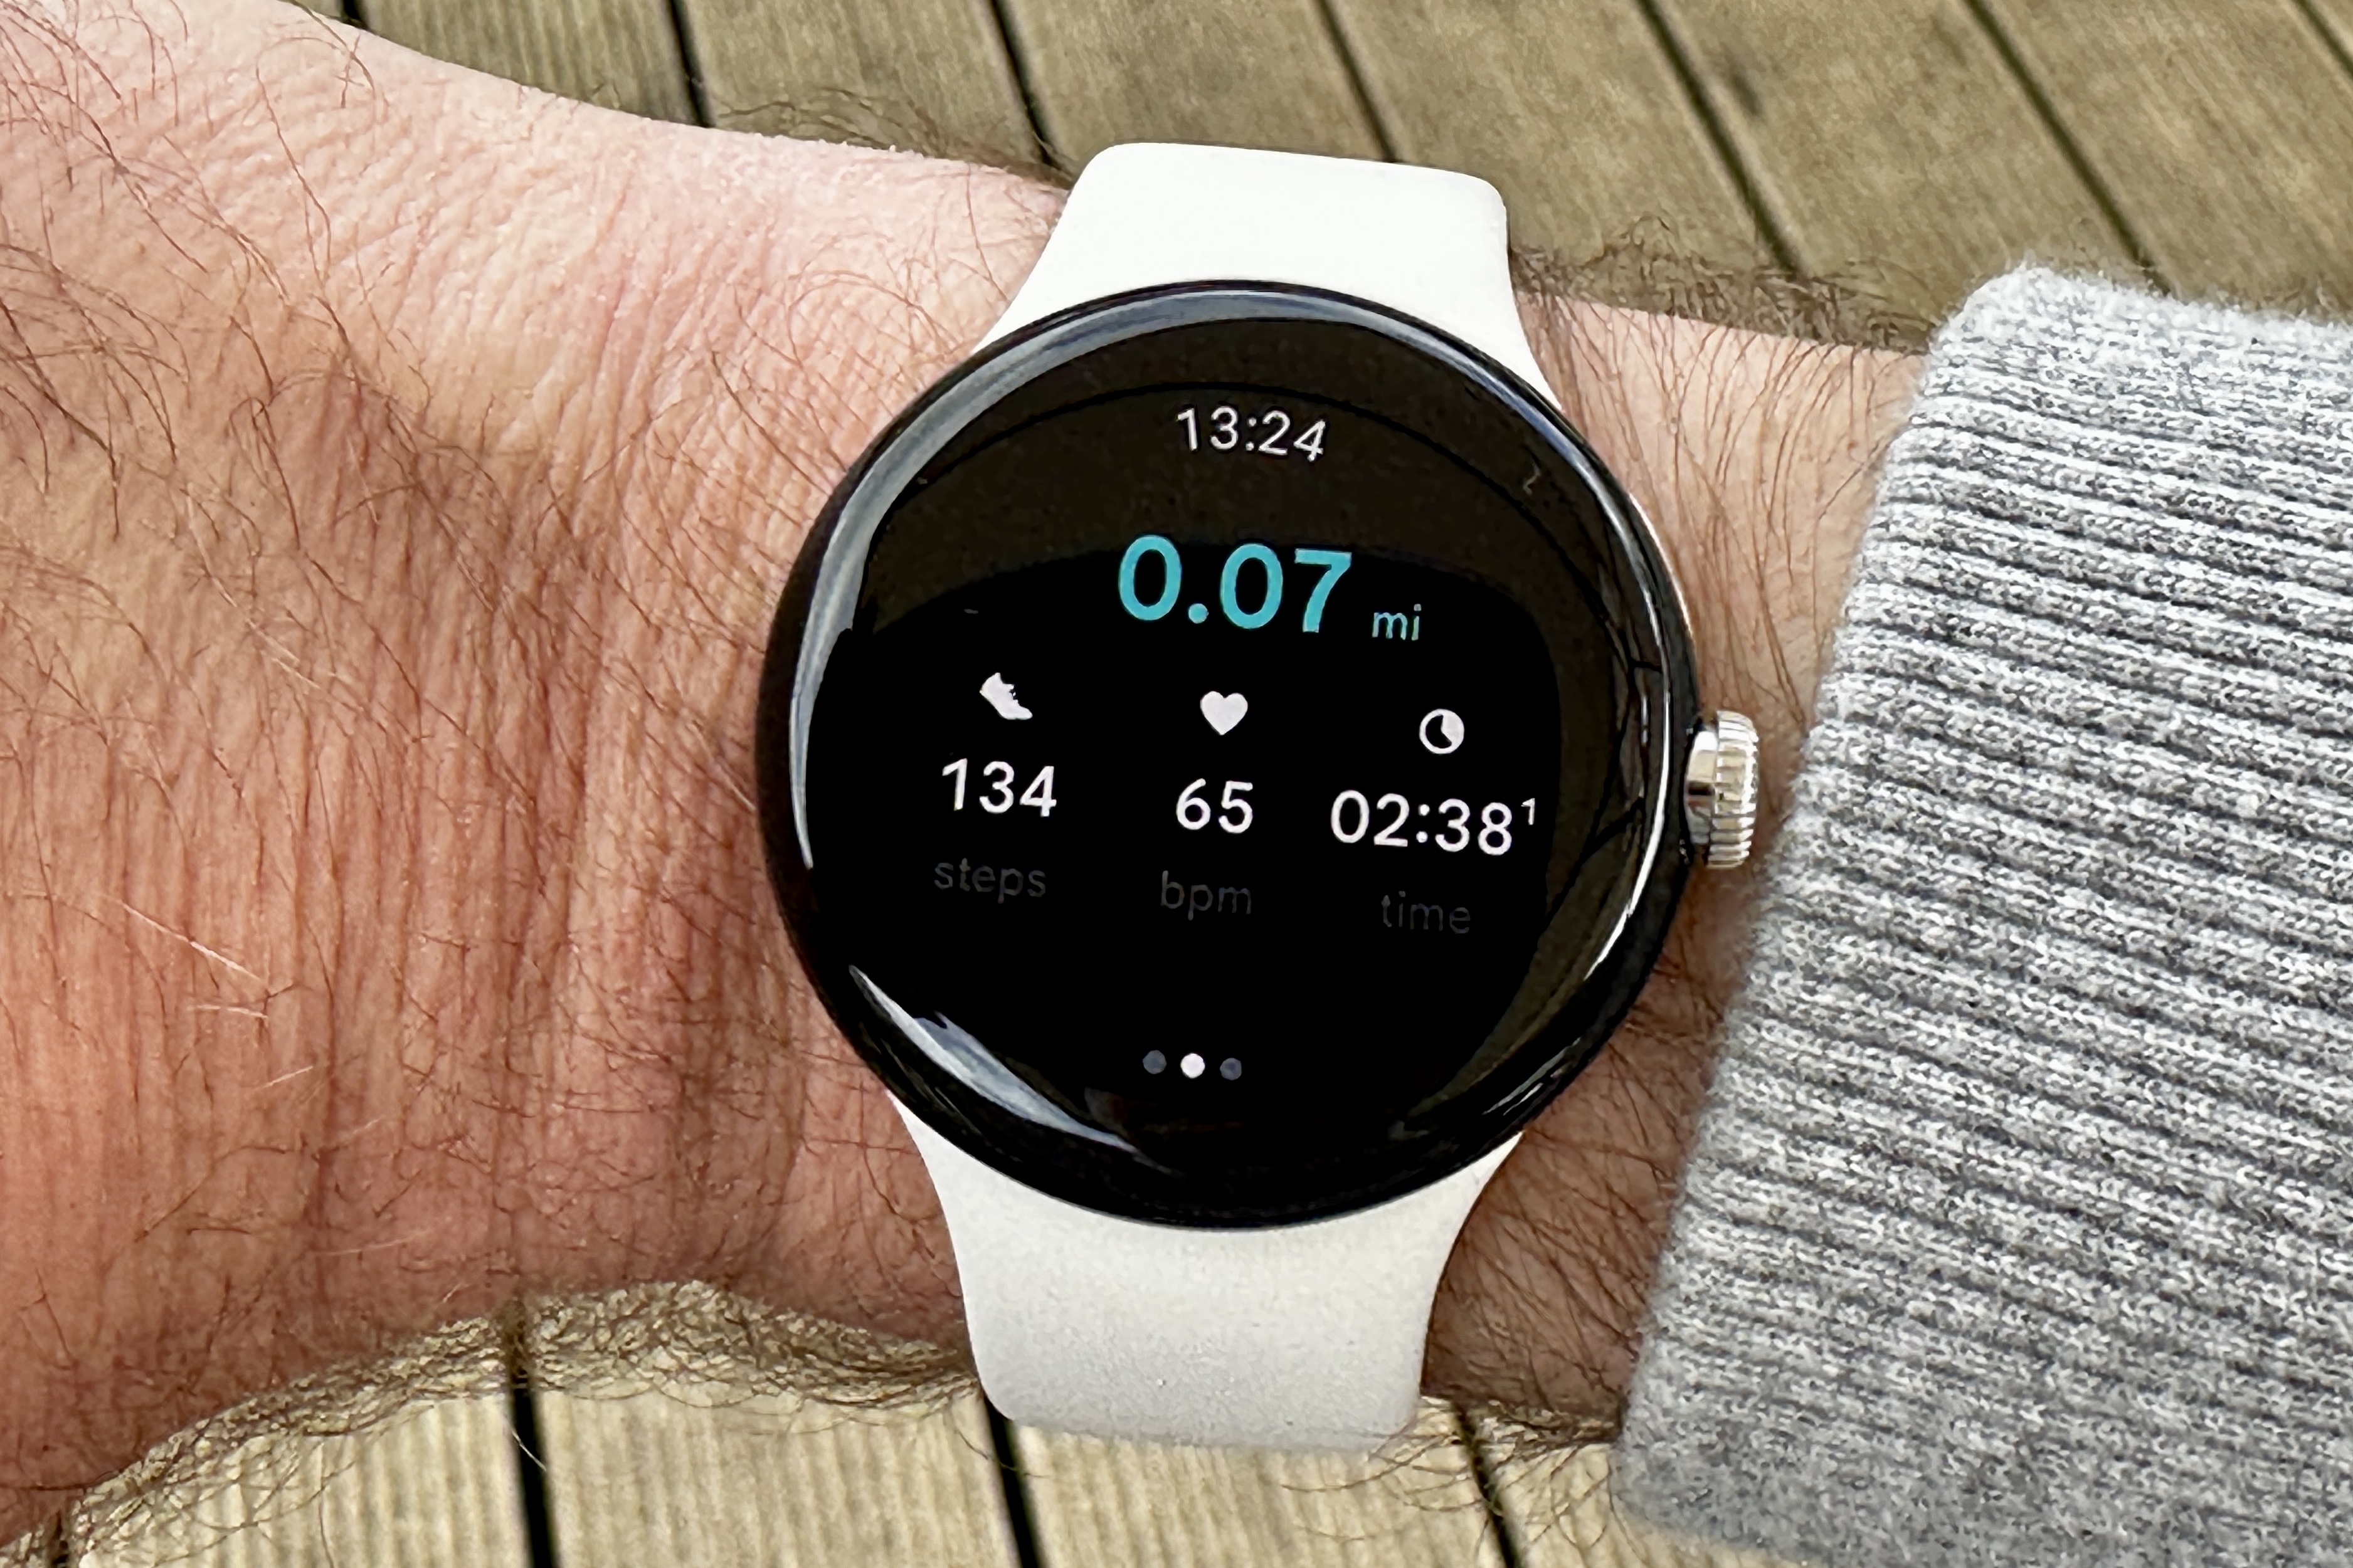 Workout screen on the Google Pixel Watch.